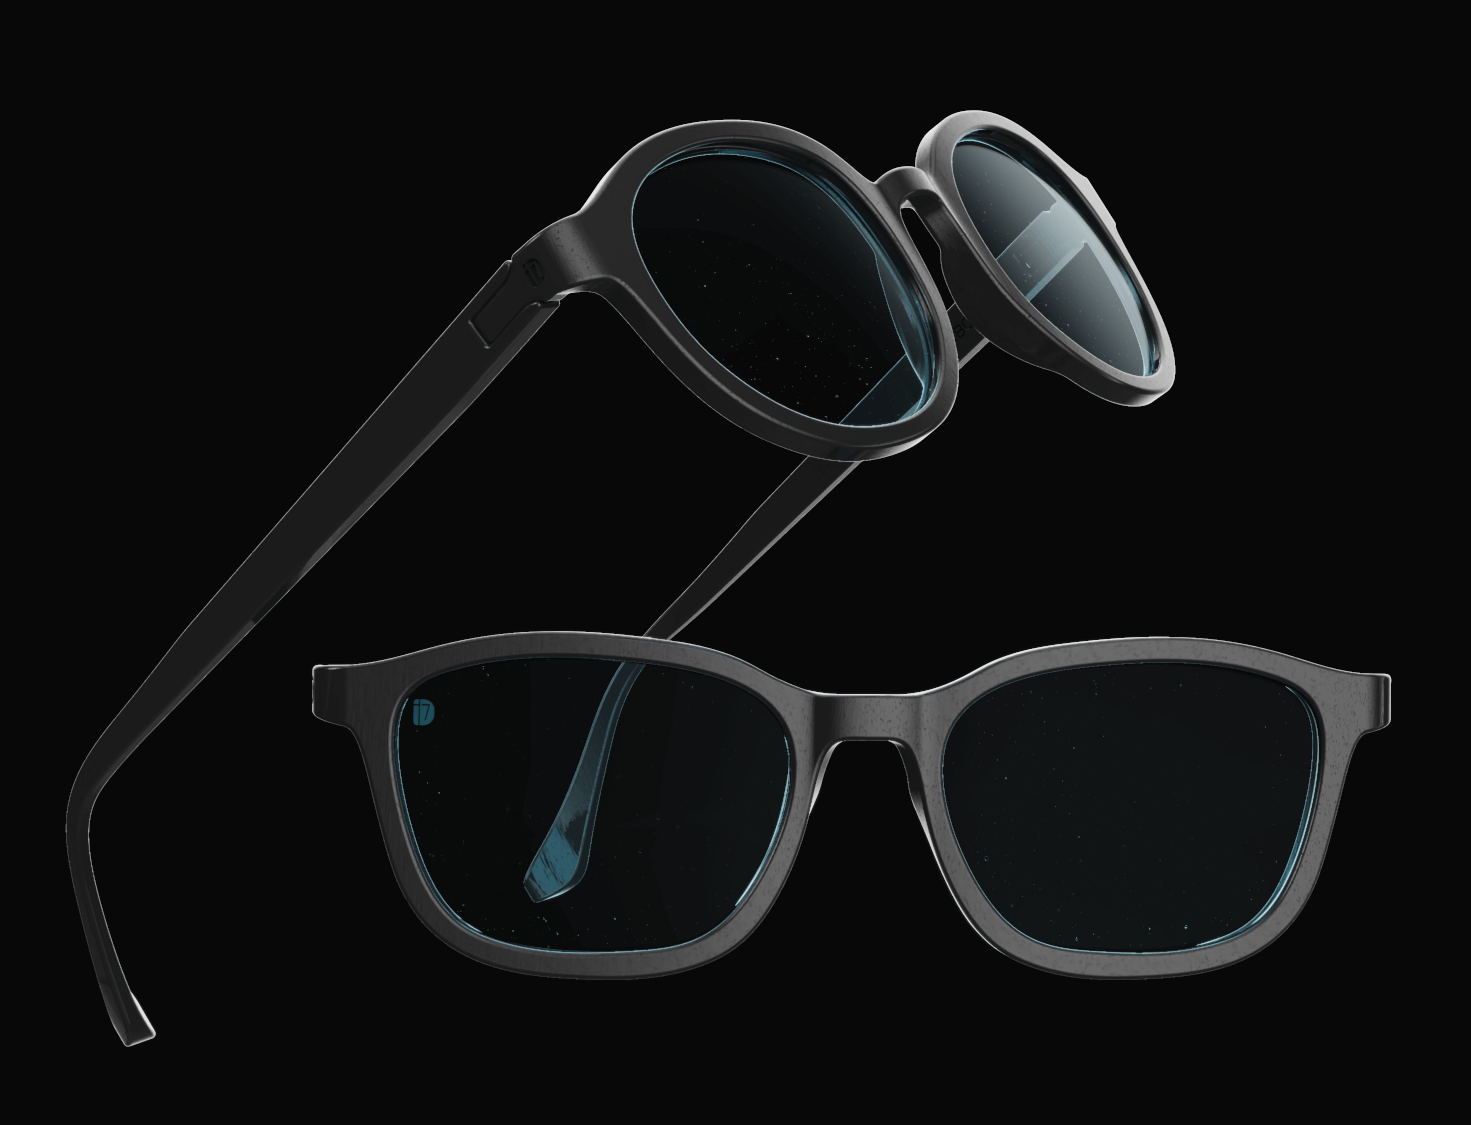 A banner image of the ID7 glasses